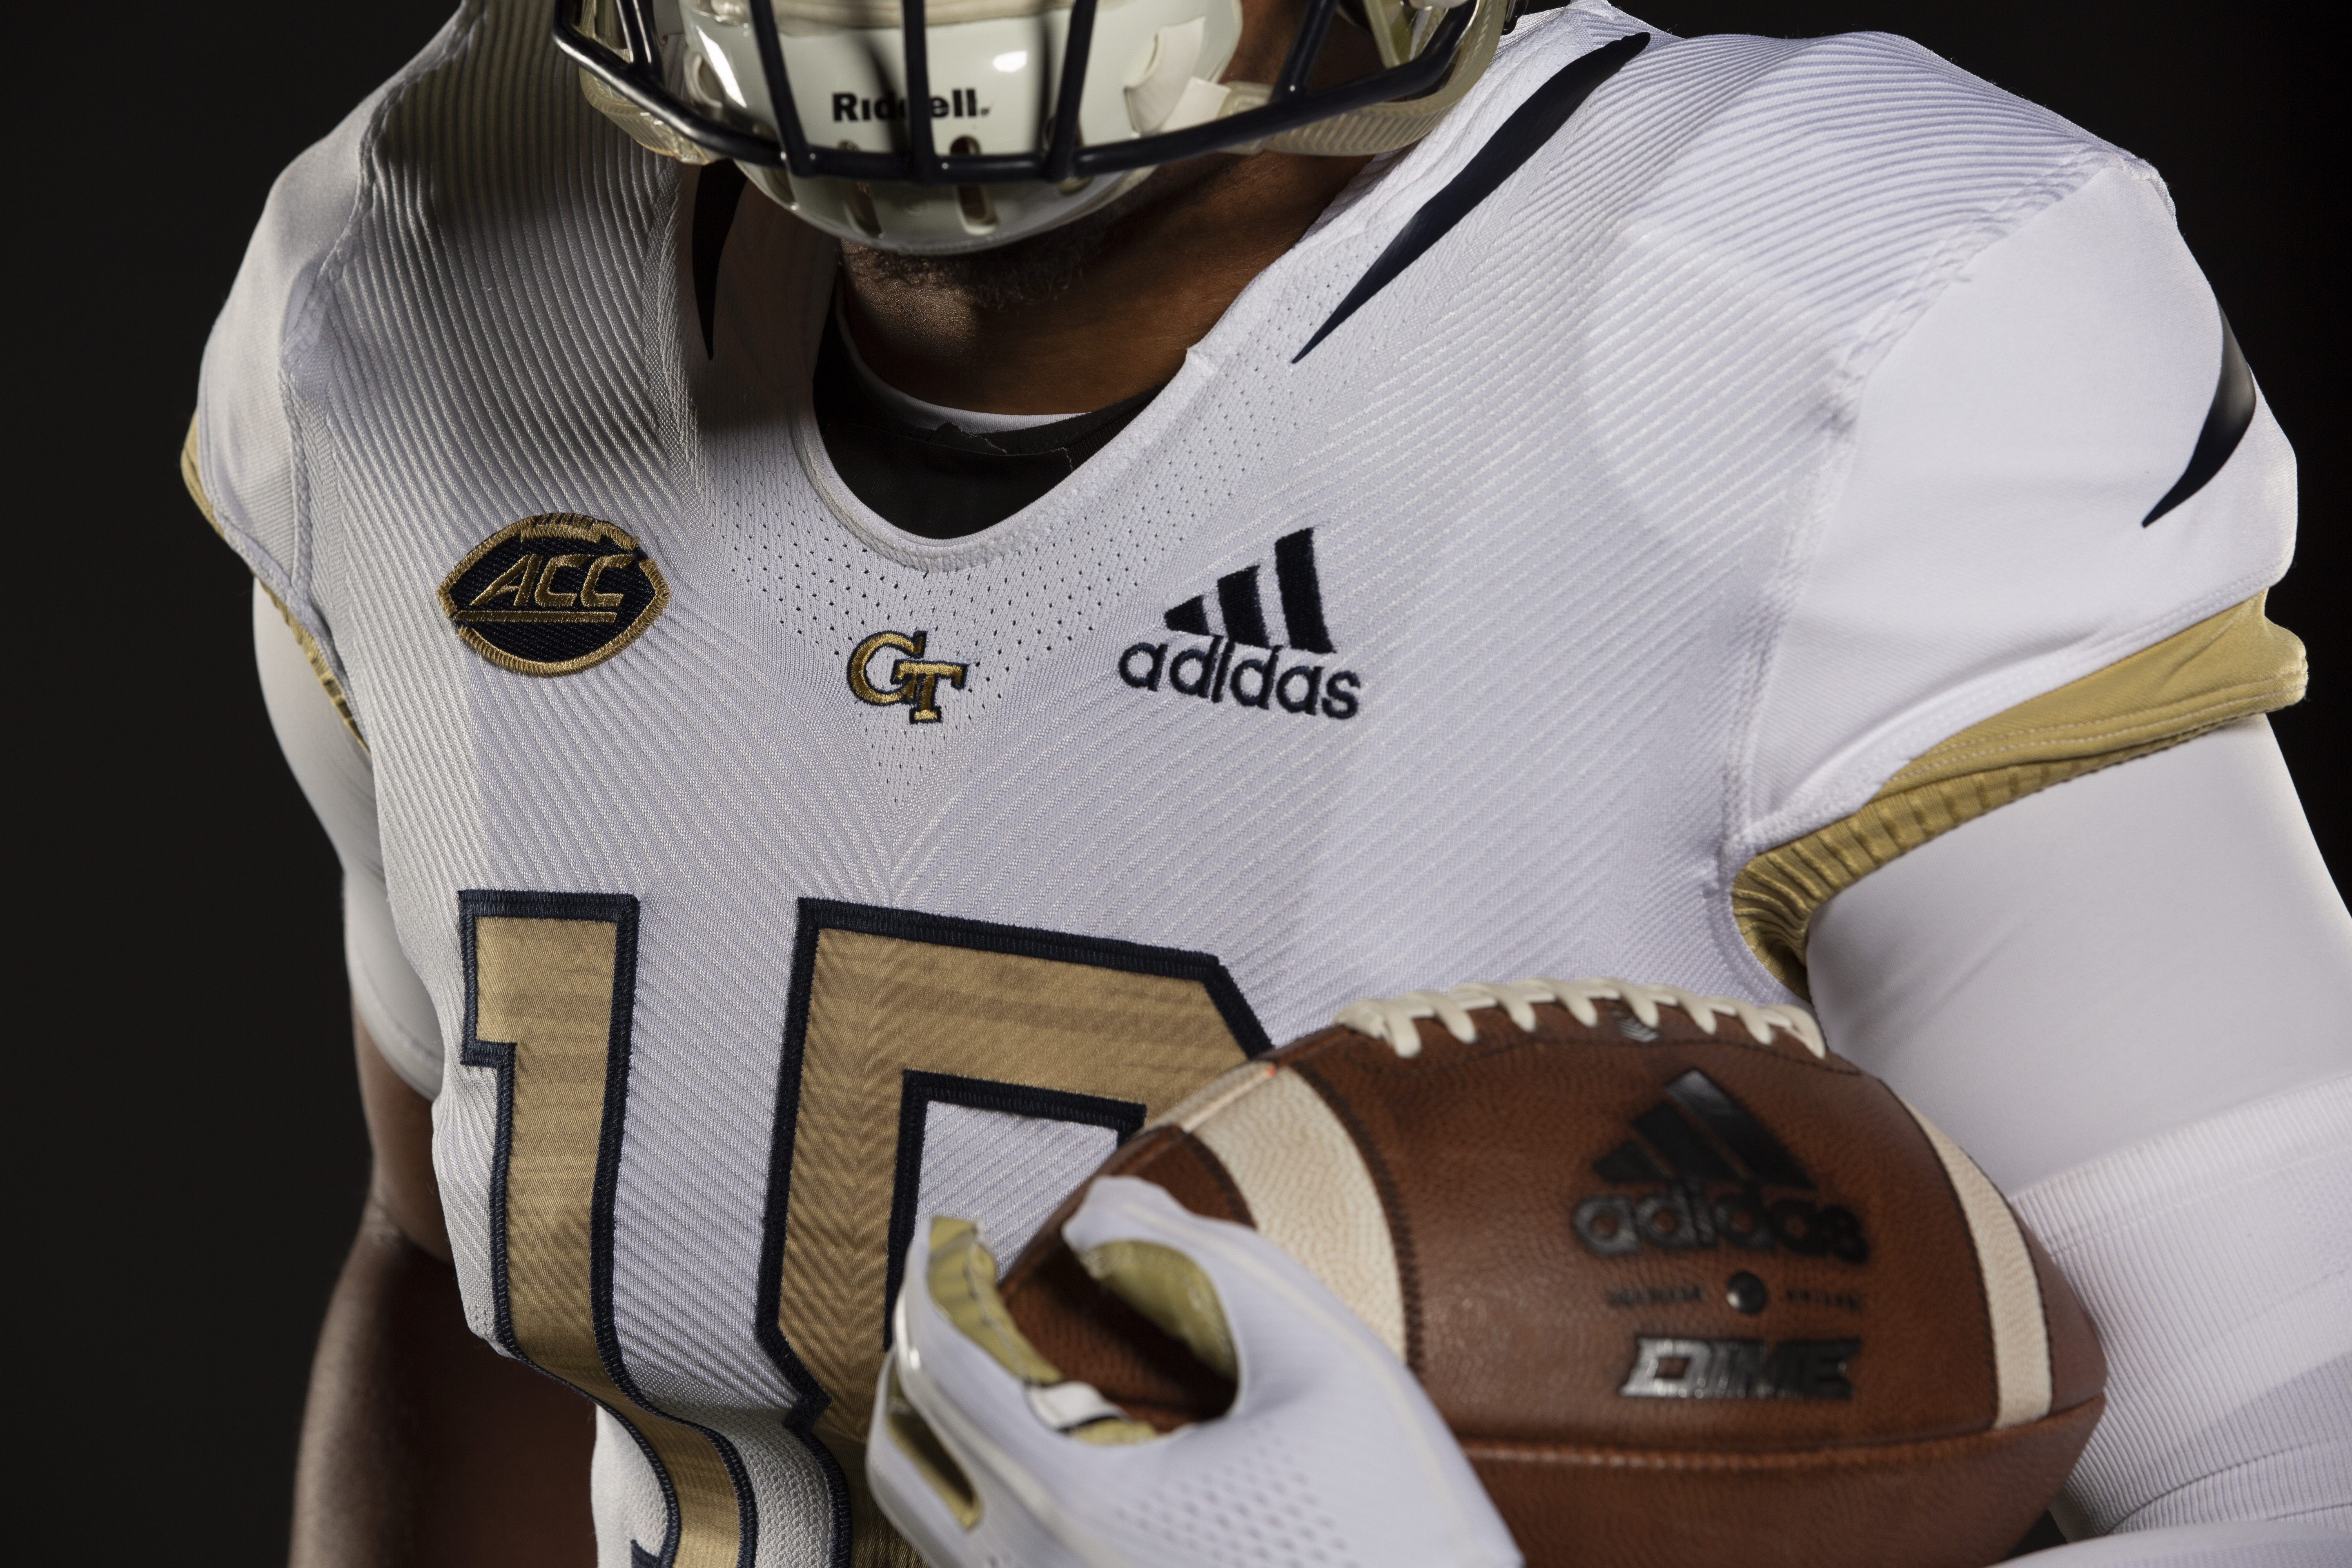 white and gold football jersey